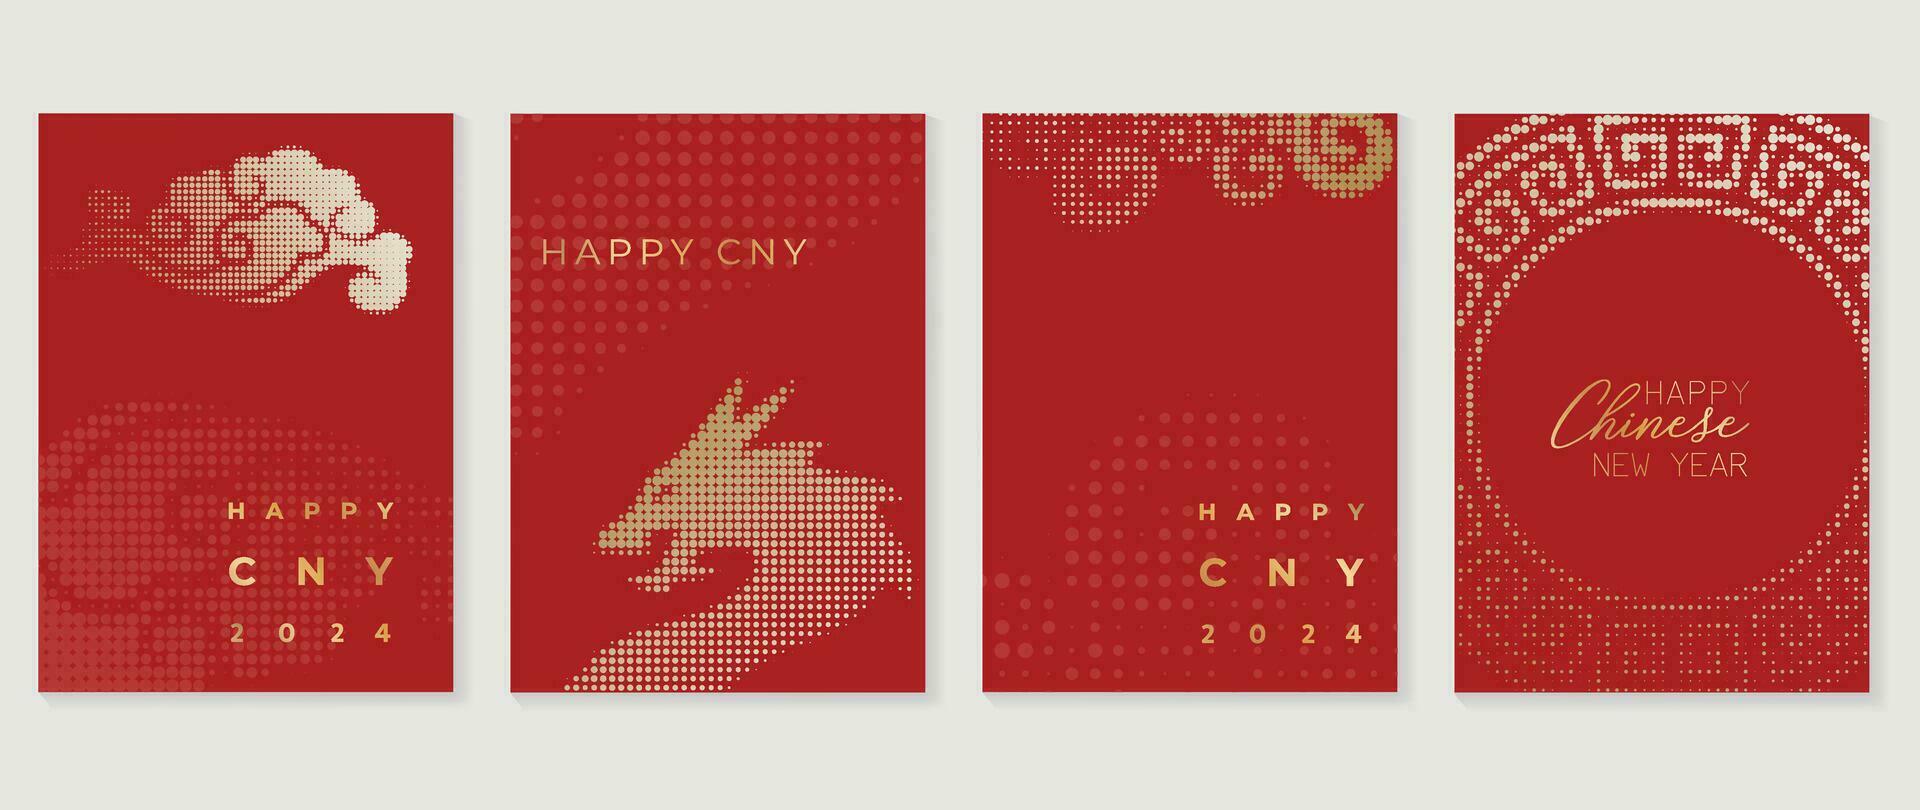 Chinese New Year card background vector. Year of the dragon design with golden dragon, chinese lantern, cloud, halftone. Elegant oriental illustration for cover, banner, website, calendar, envelope. vector